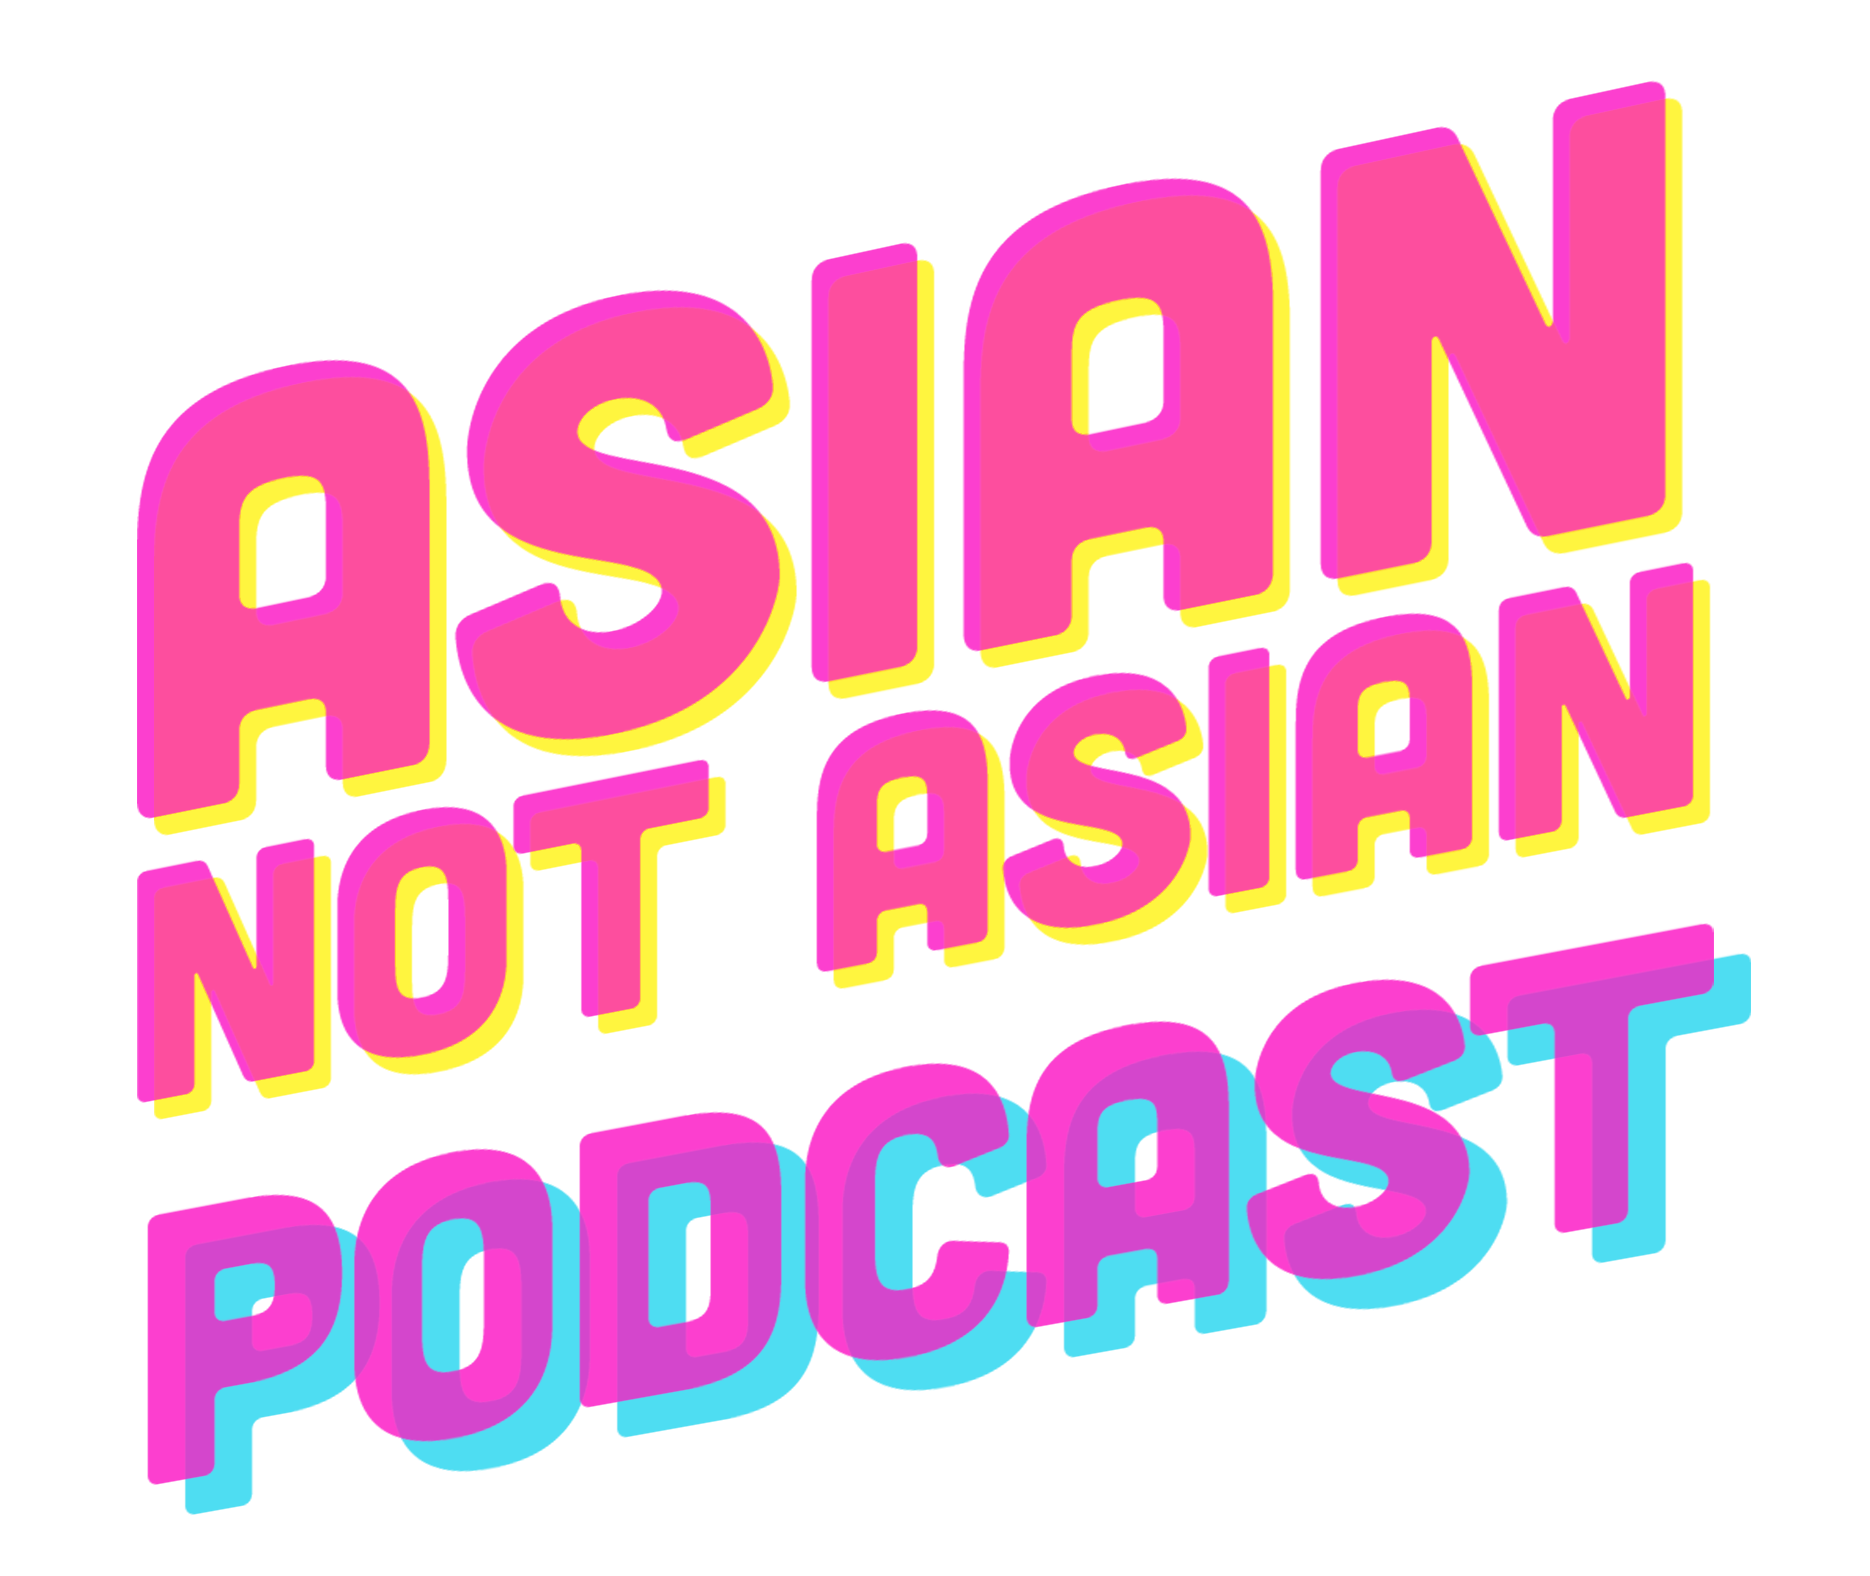 Asian Not Asian Podcast